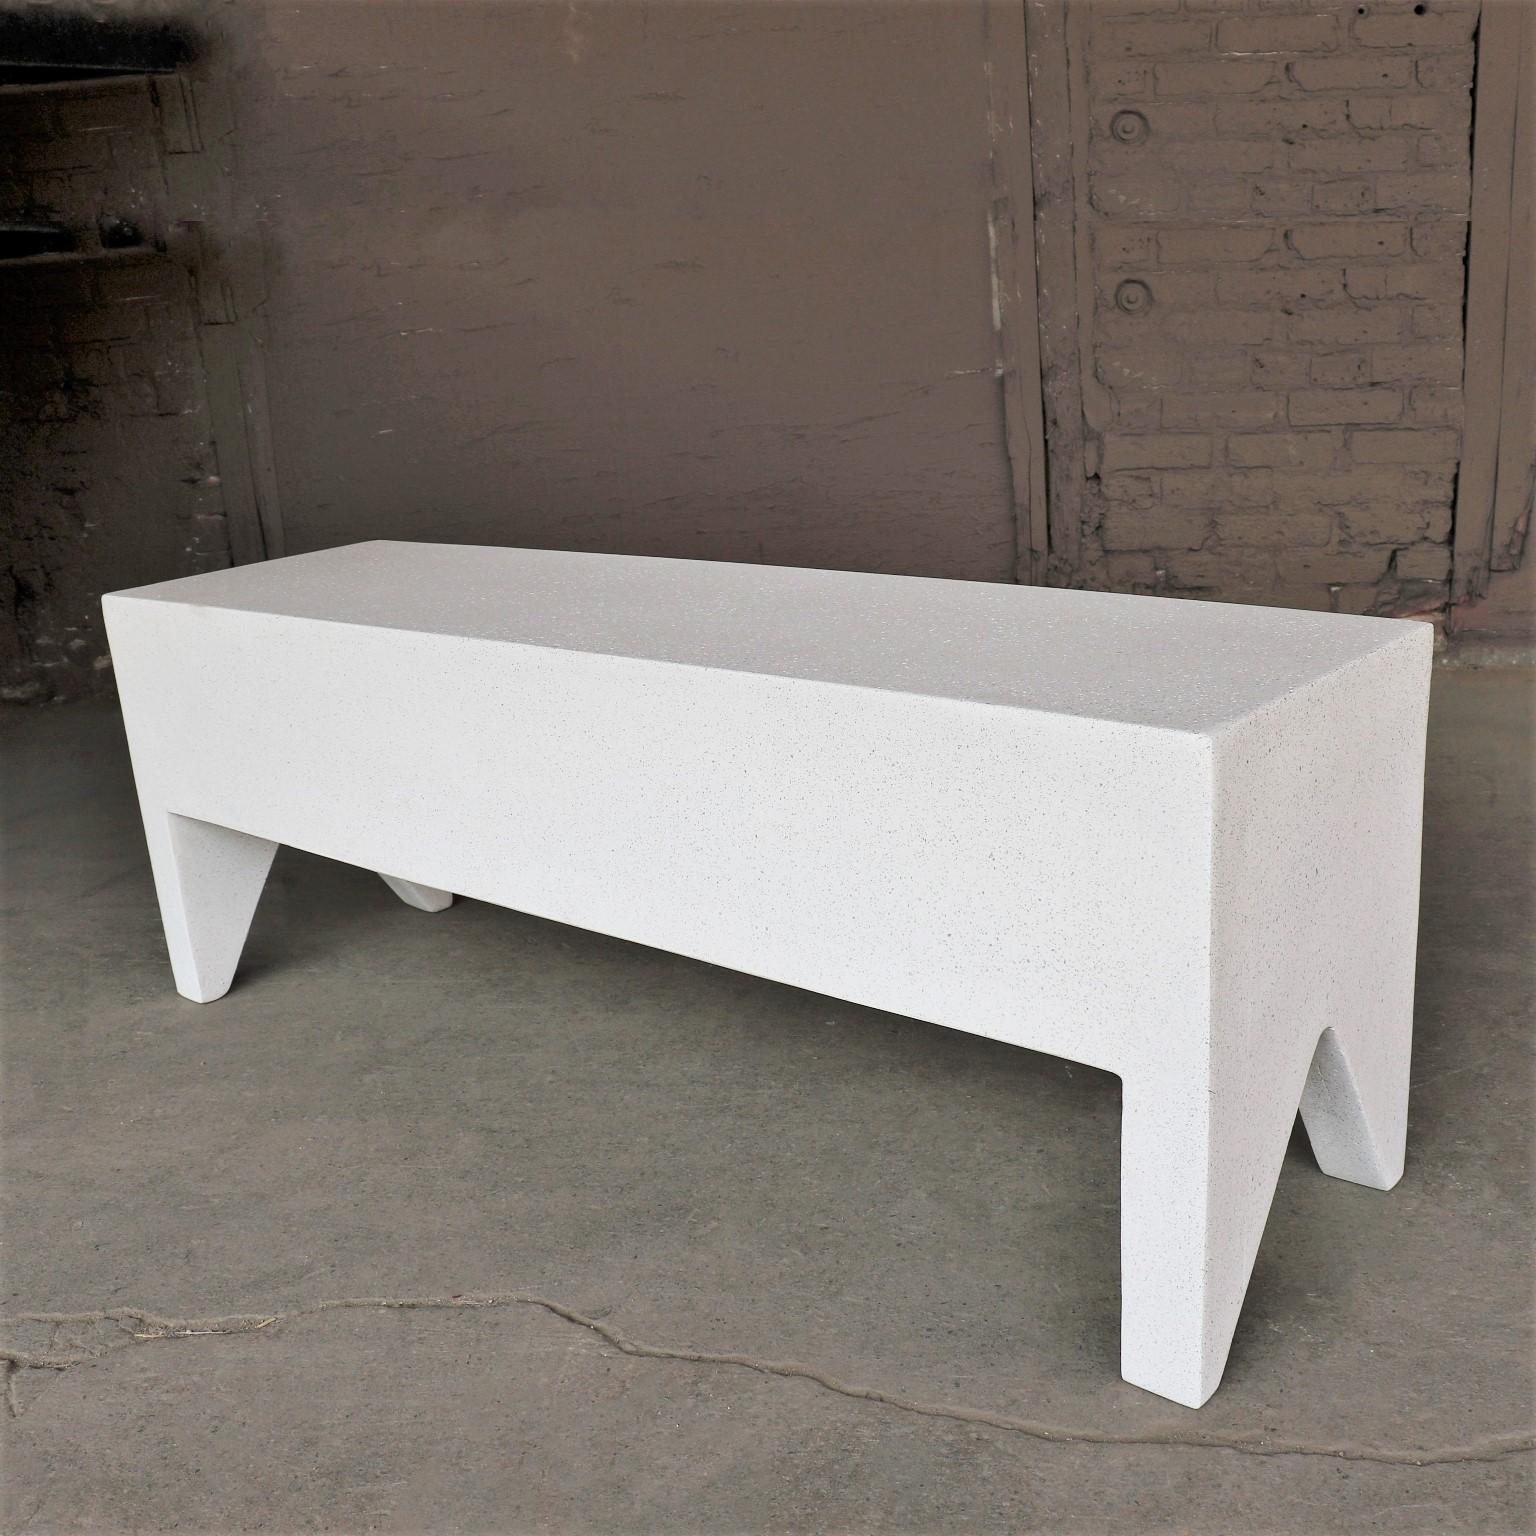 Minimalist Cast Resin 'Farm' Bench, White Stone Finish by Zachary A. Design For Sale